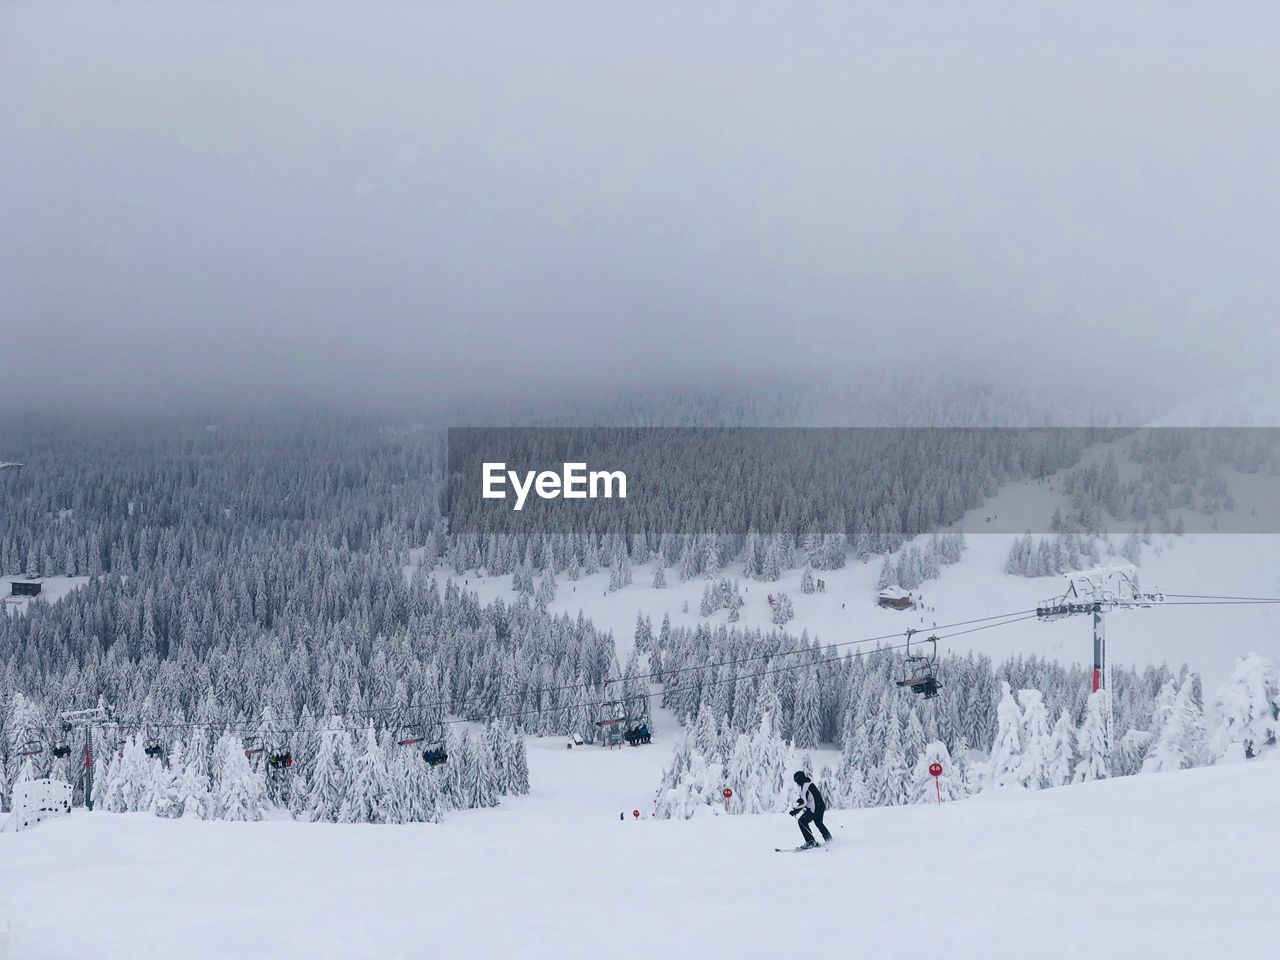 Skier on the slope surrounded by forest of evergreen trees